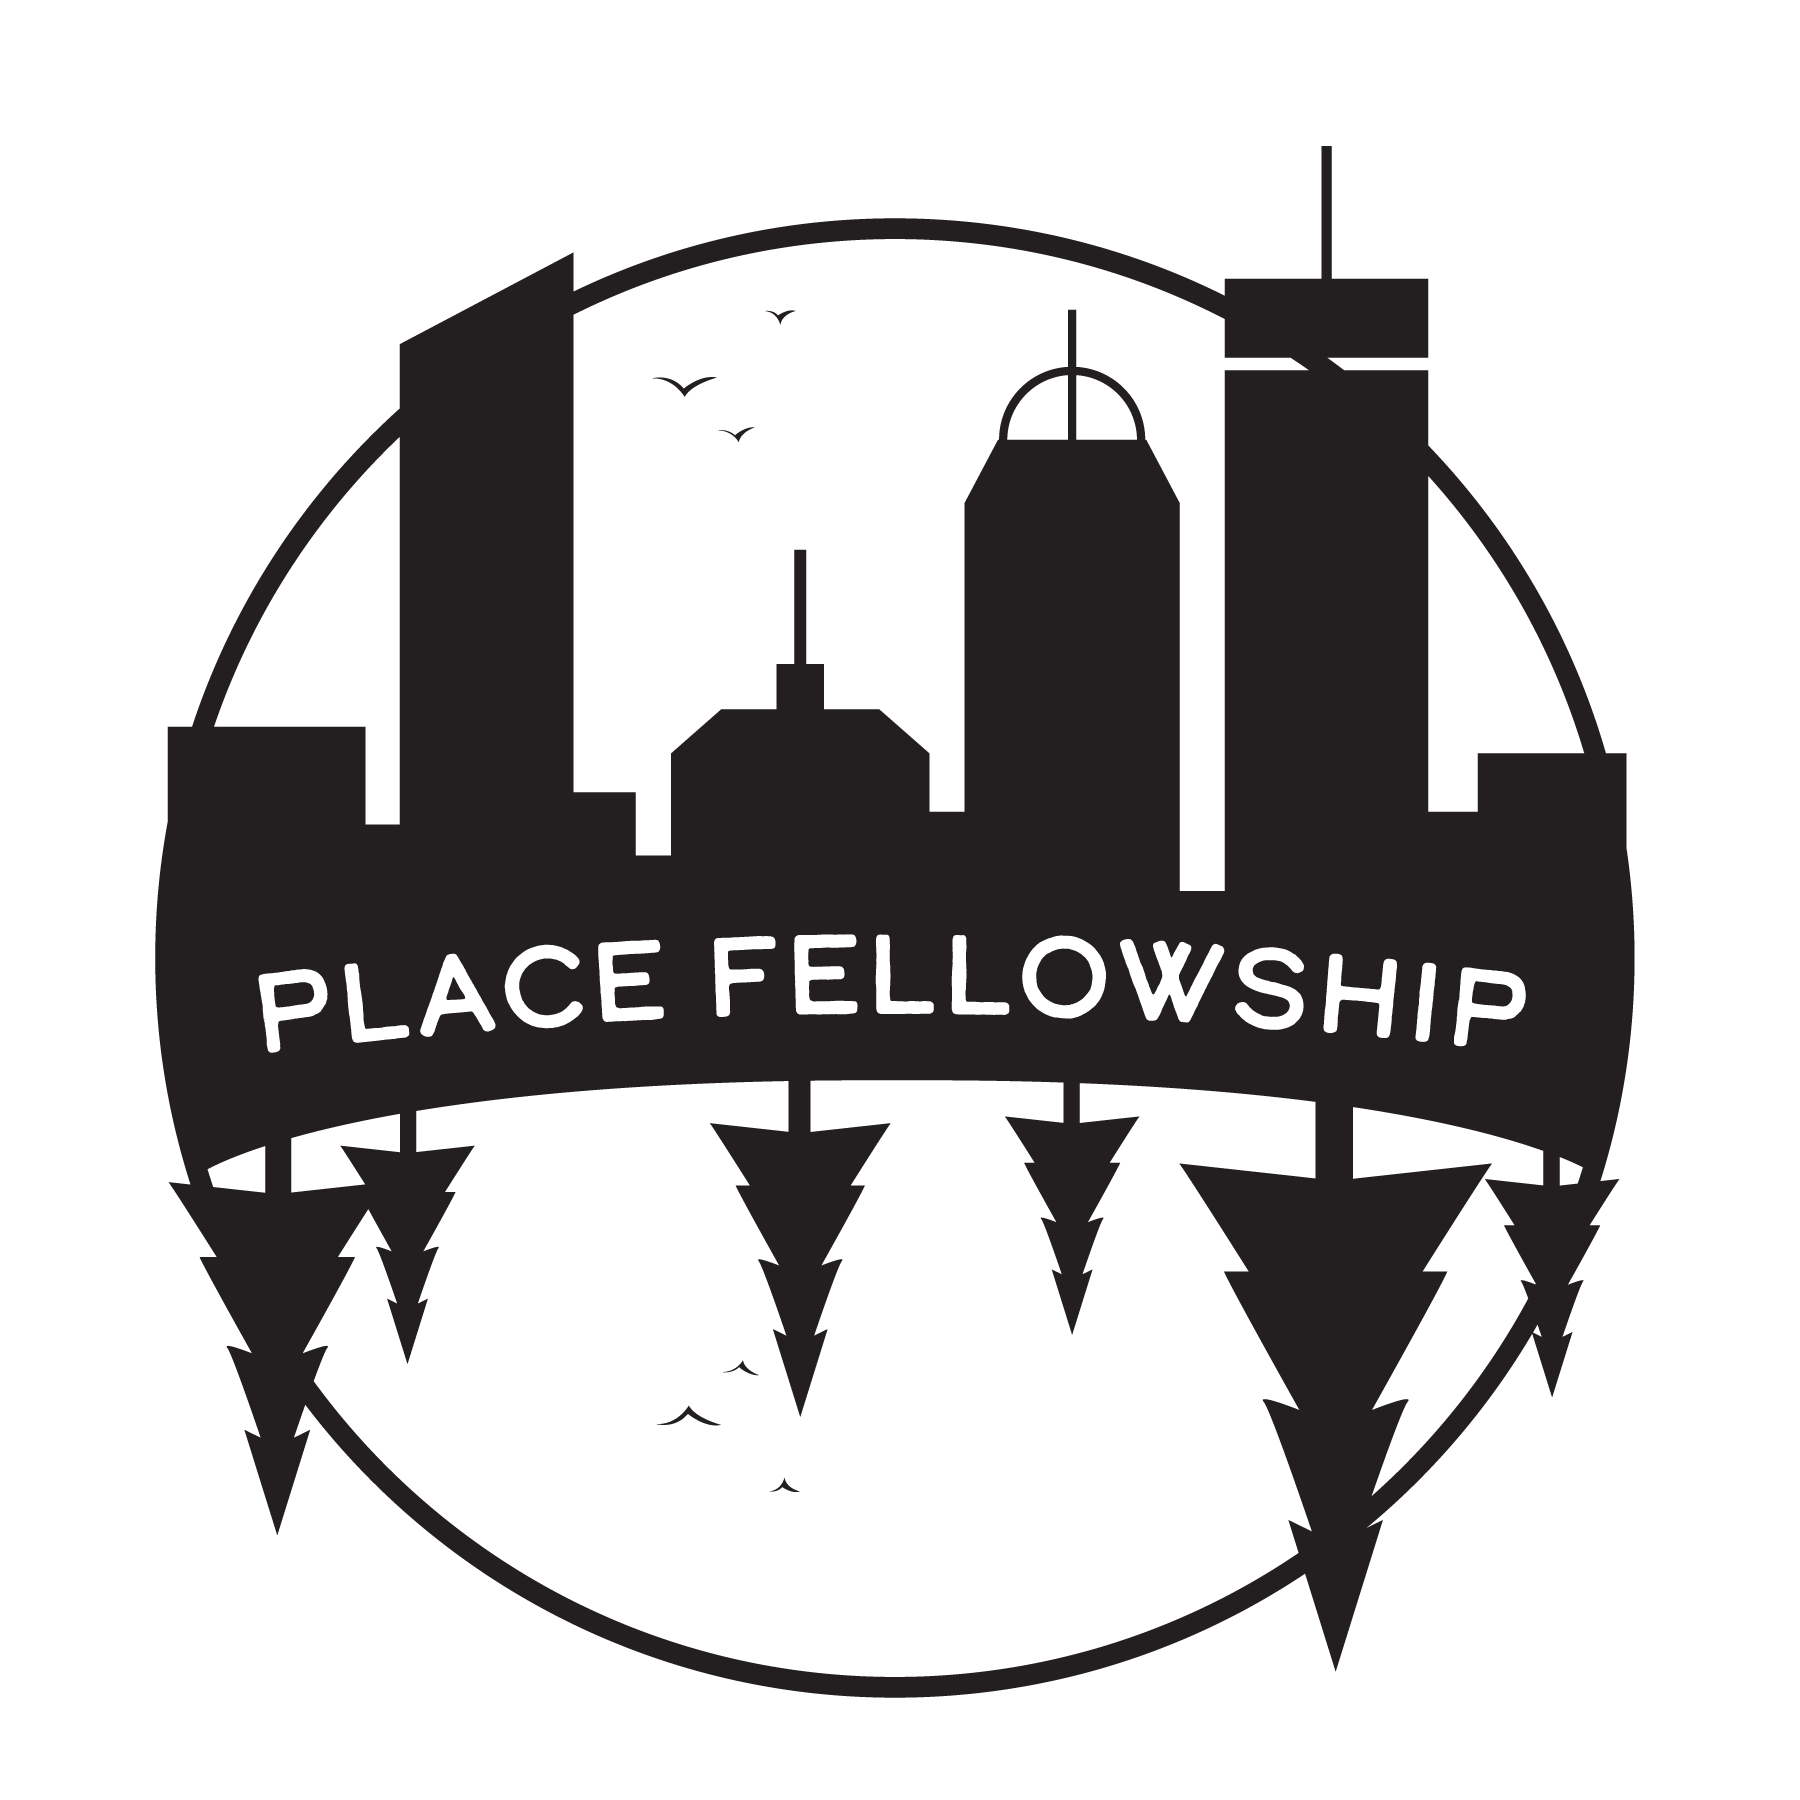 PLACE Fellowship logo features the silhouette of a forest in mirror reflection of a cityscape with the program title between them